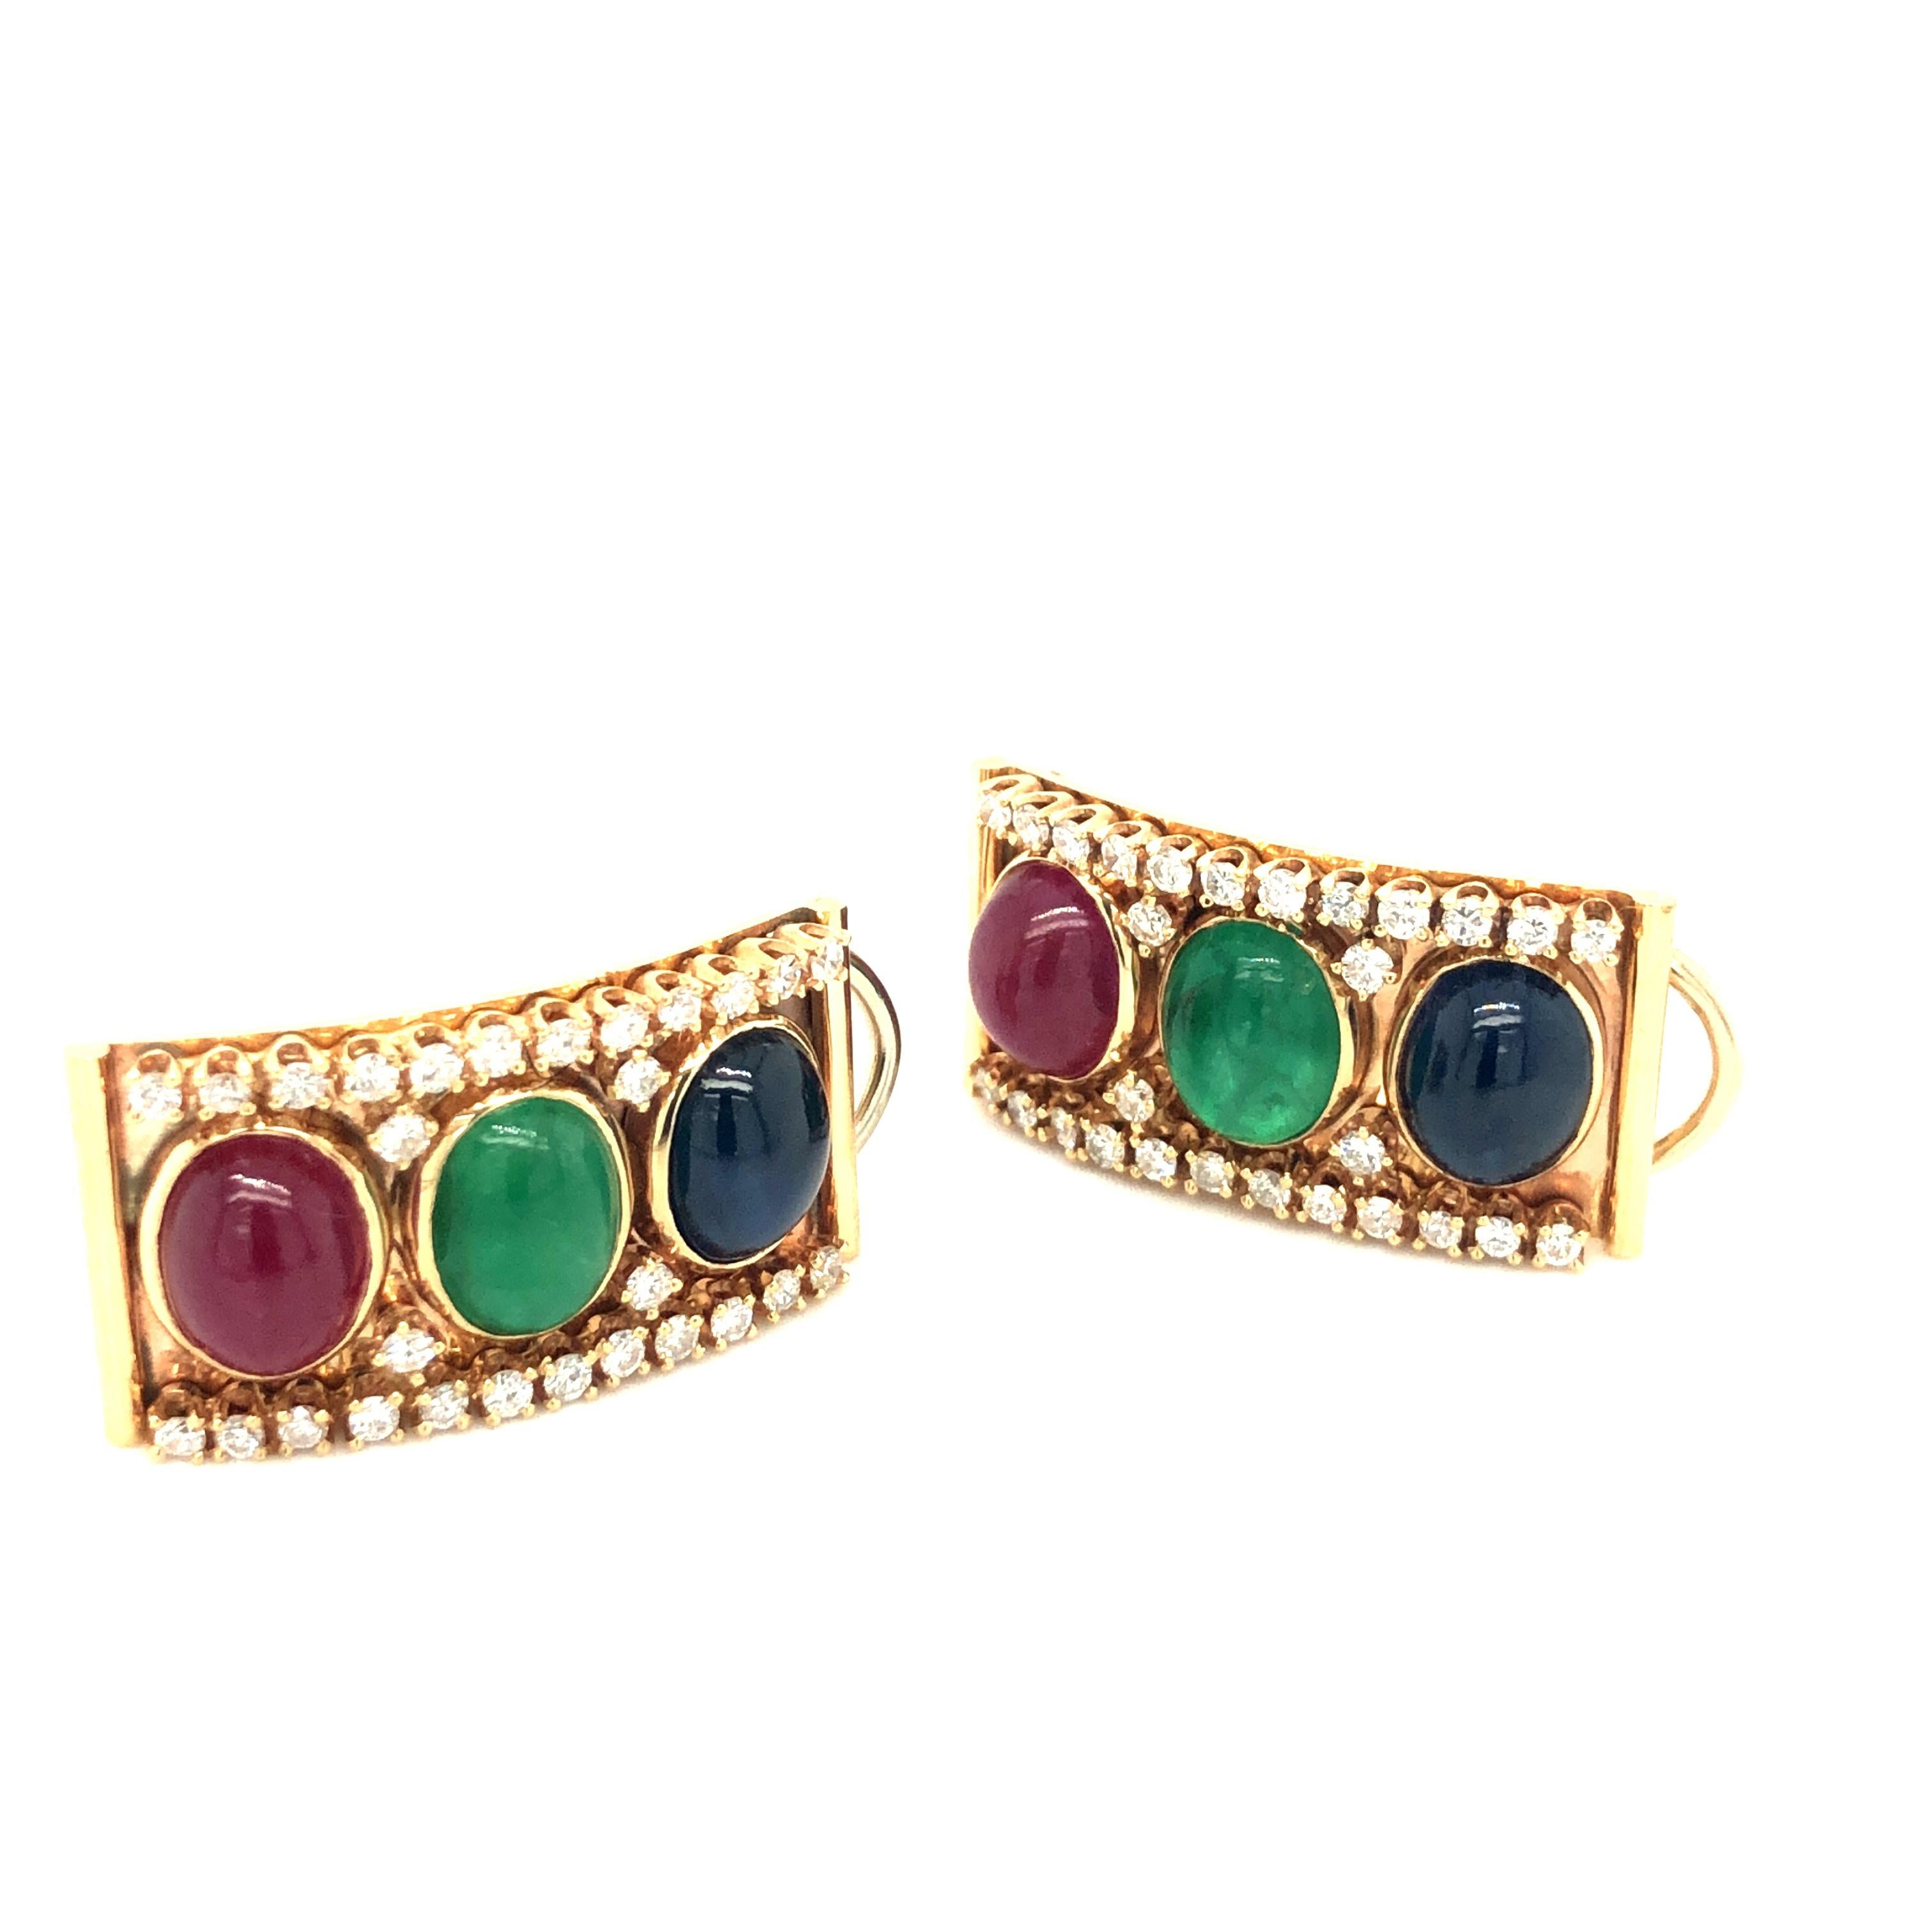 Stunning pair of 1970-80 14kt gold earring, featuring 6 natural earth mined Rubies, sapphires and emeralds weighing approximately 19 carats together.
Earrings are further adorned with 56 natural earth mined diamonds weighing appro. 0.60 ct averaging